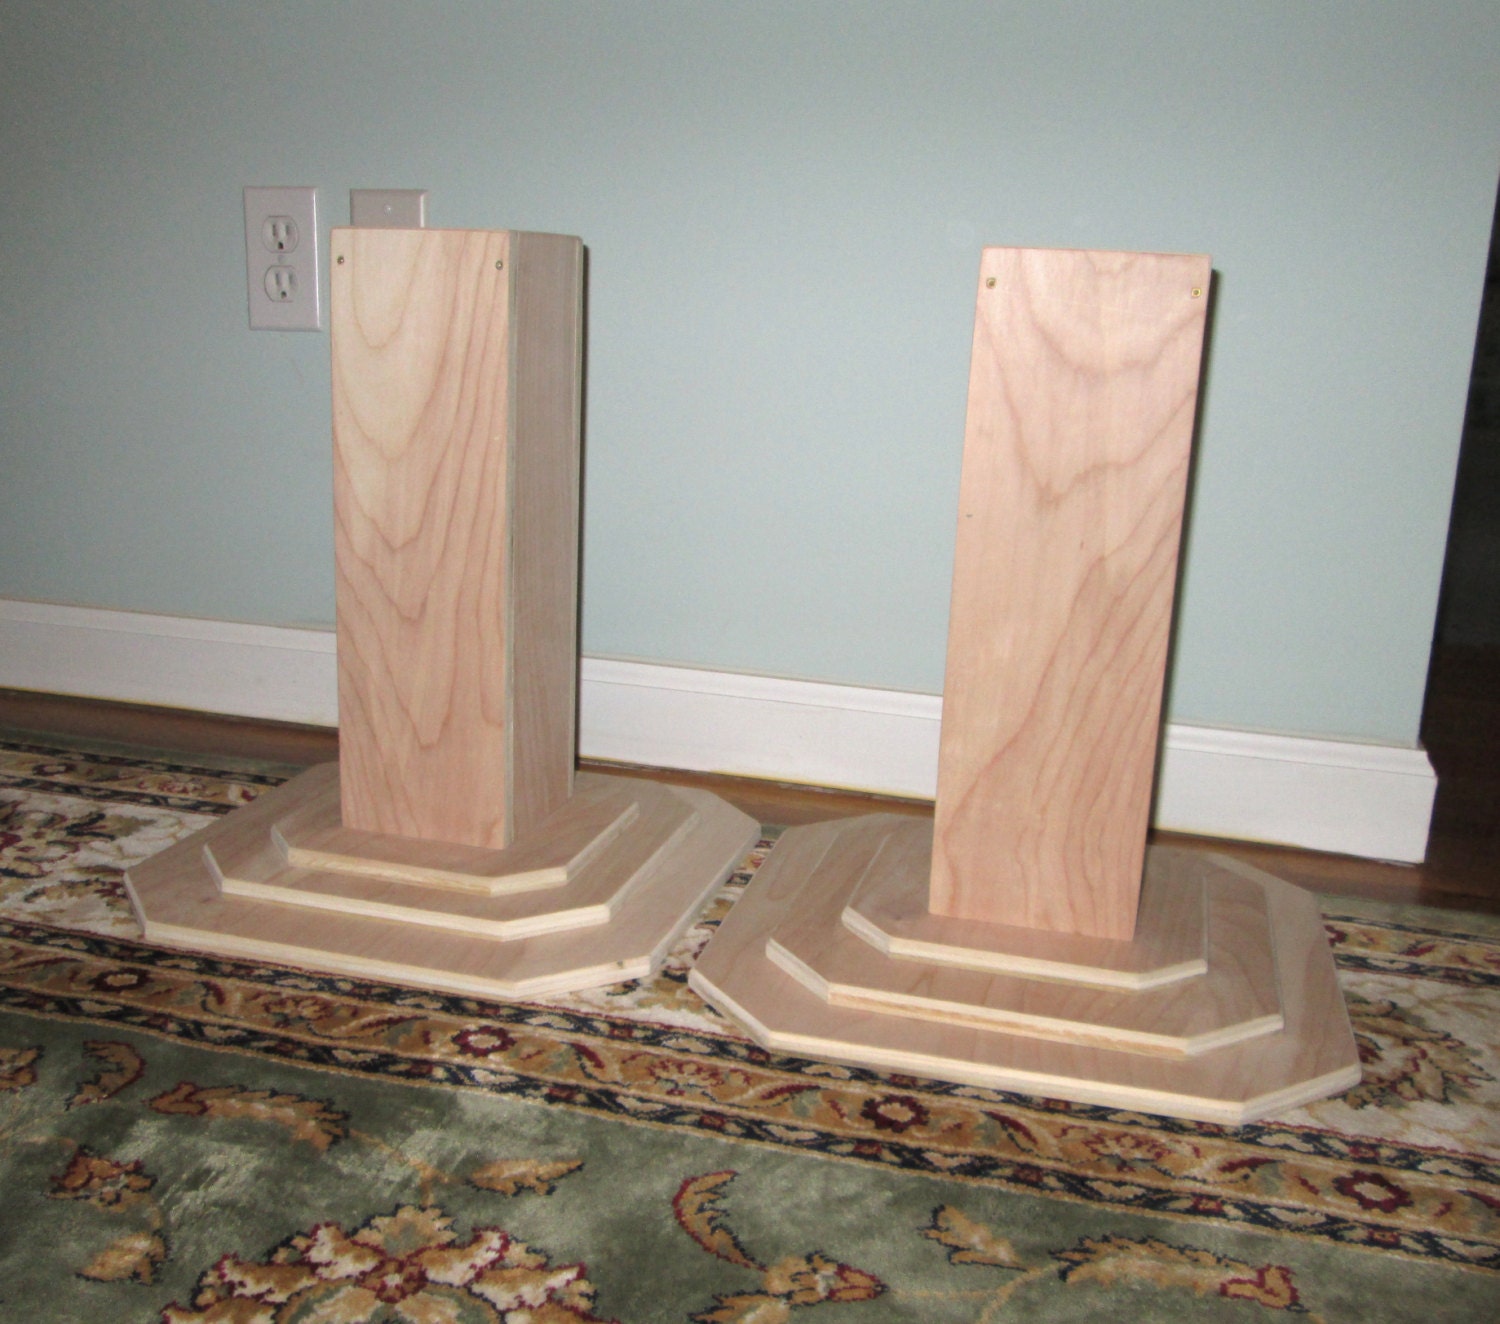 Dorm Room Bed Risers 14 Inch All Wood Construction